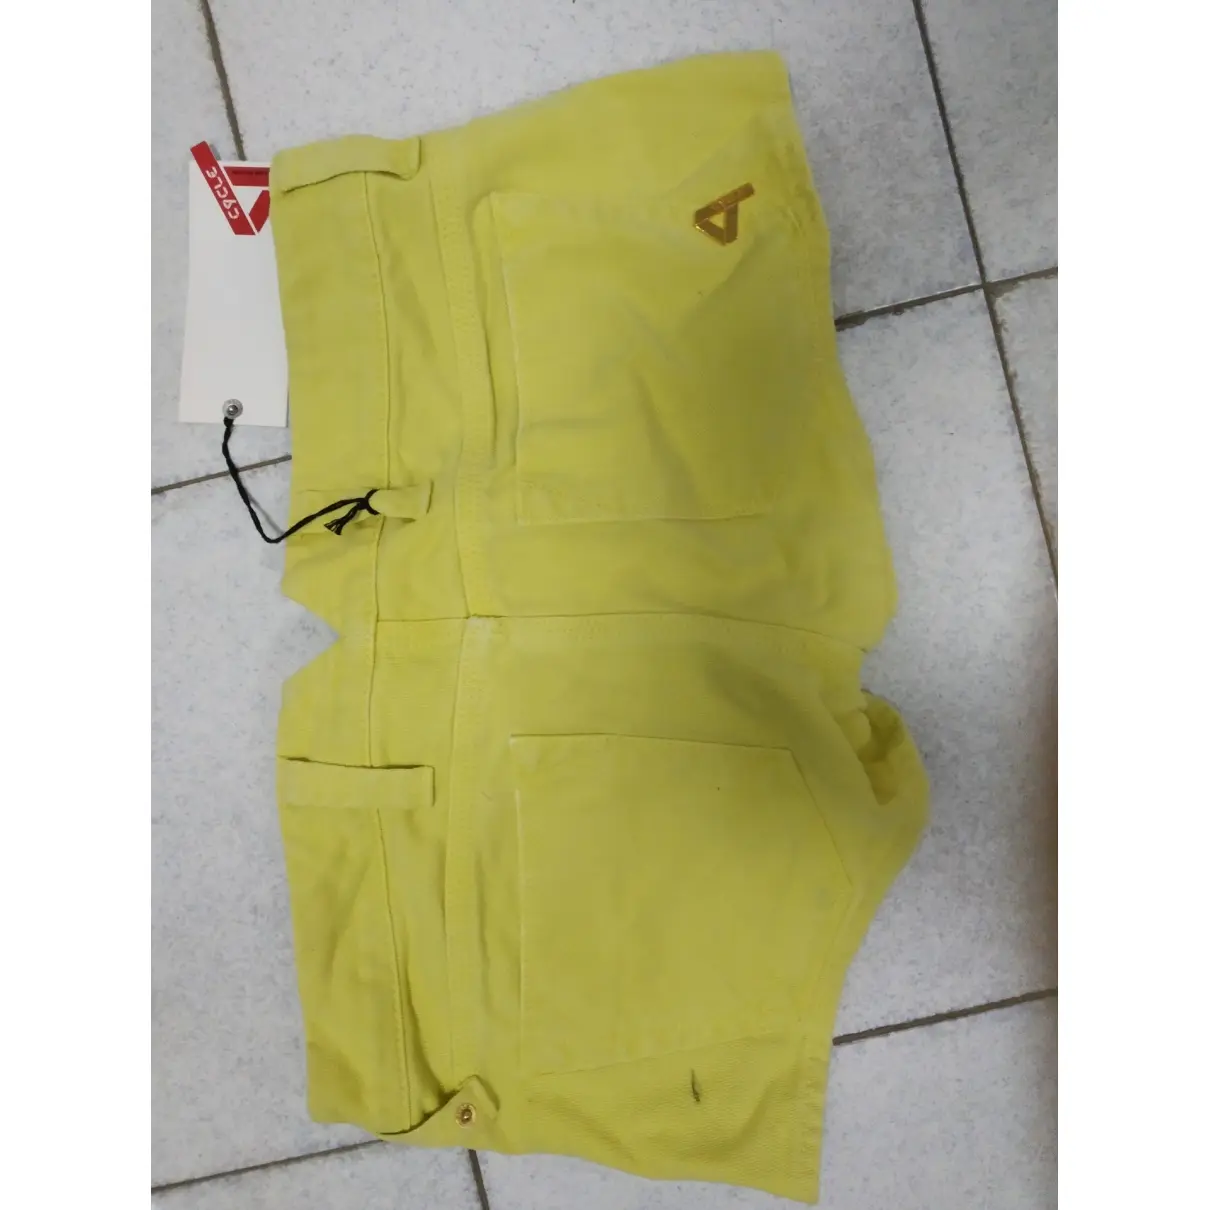 Cycle Shorts for sale